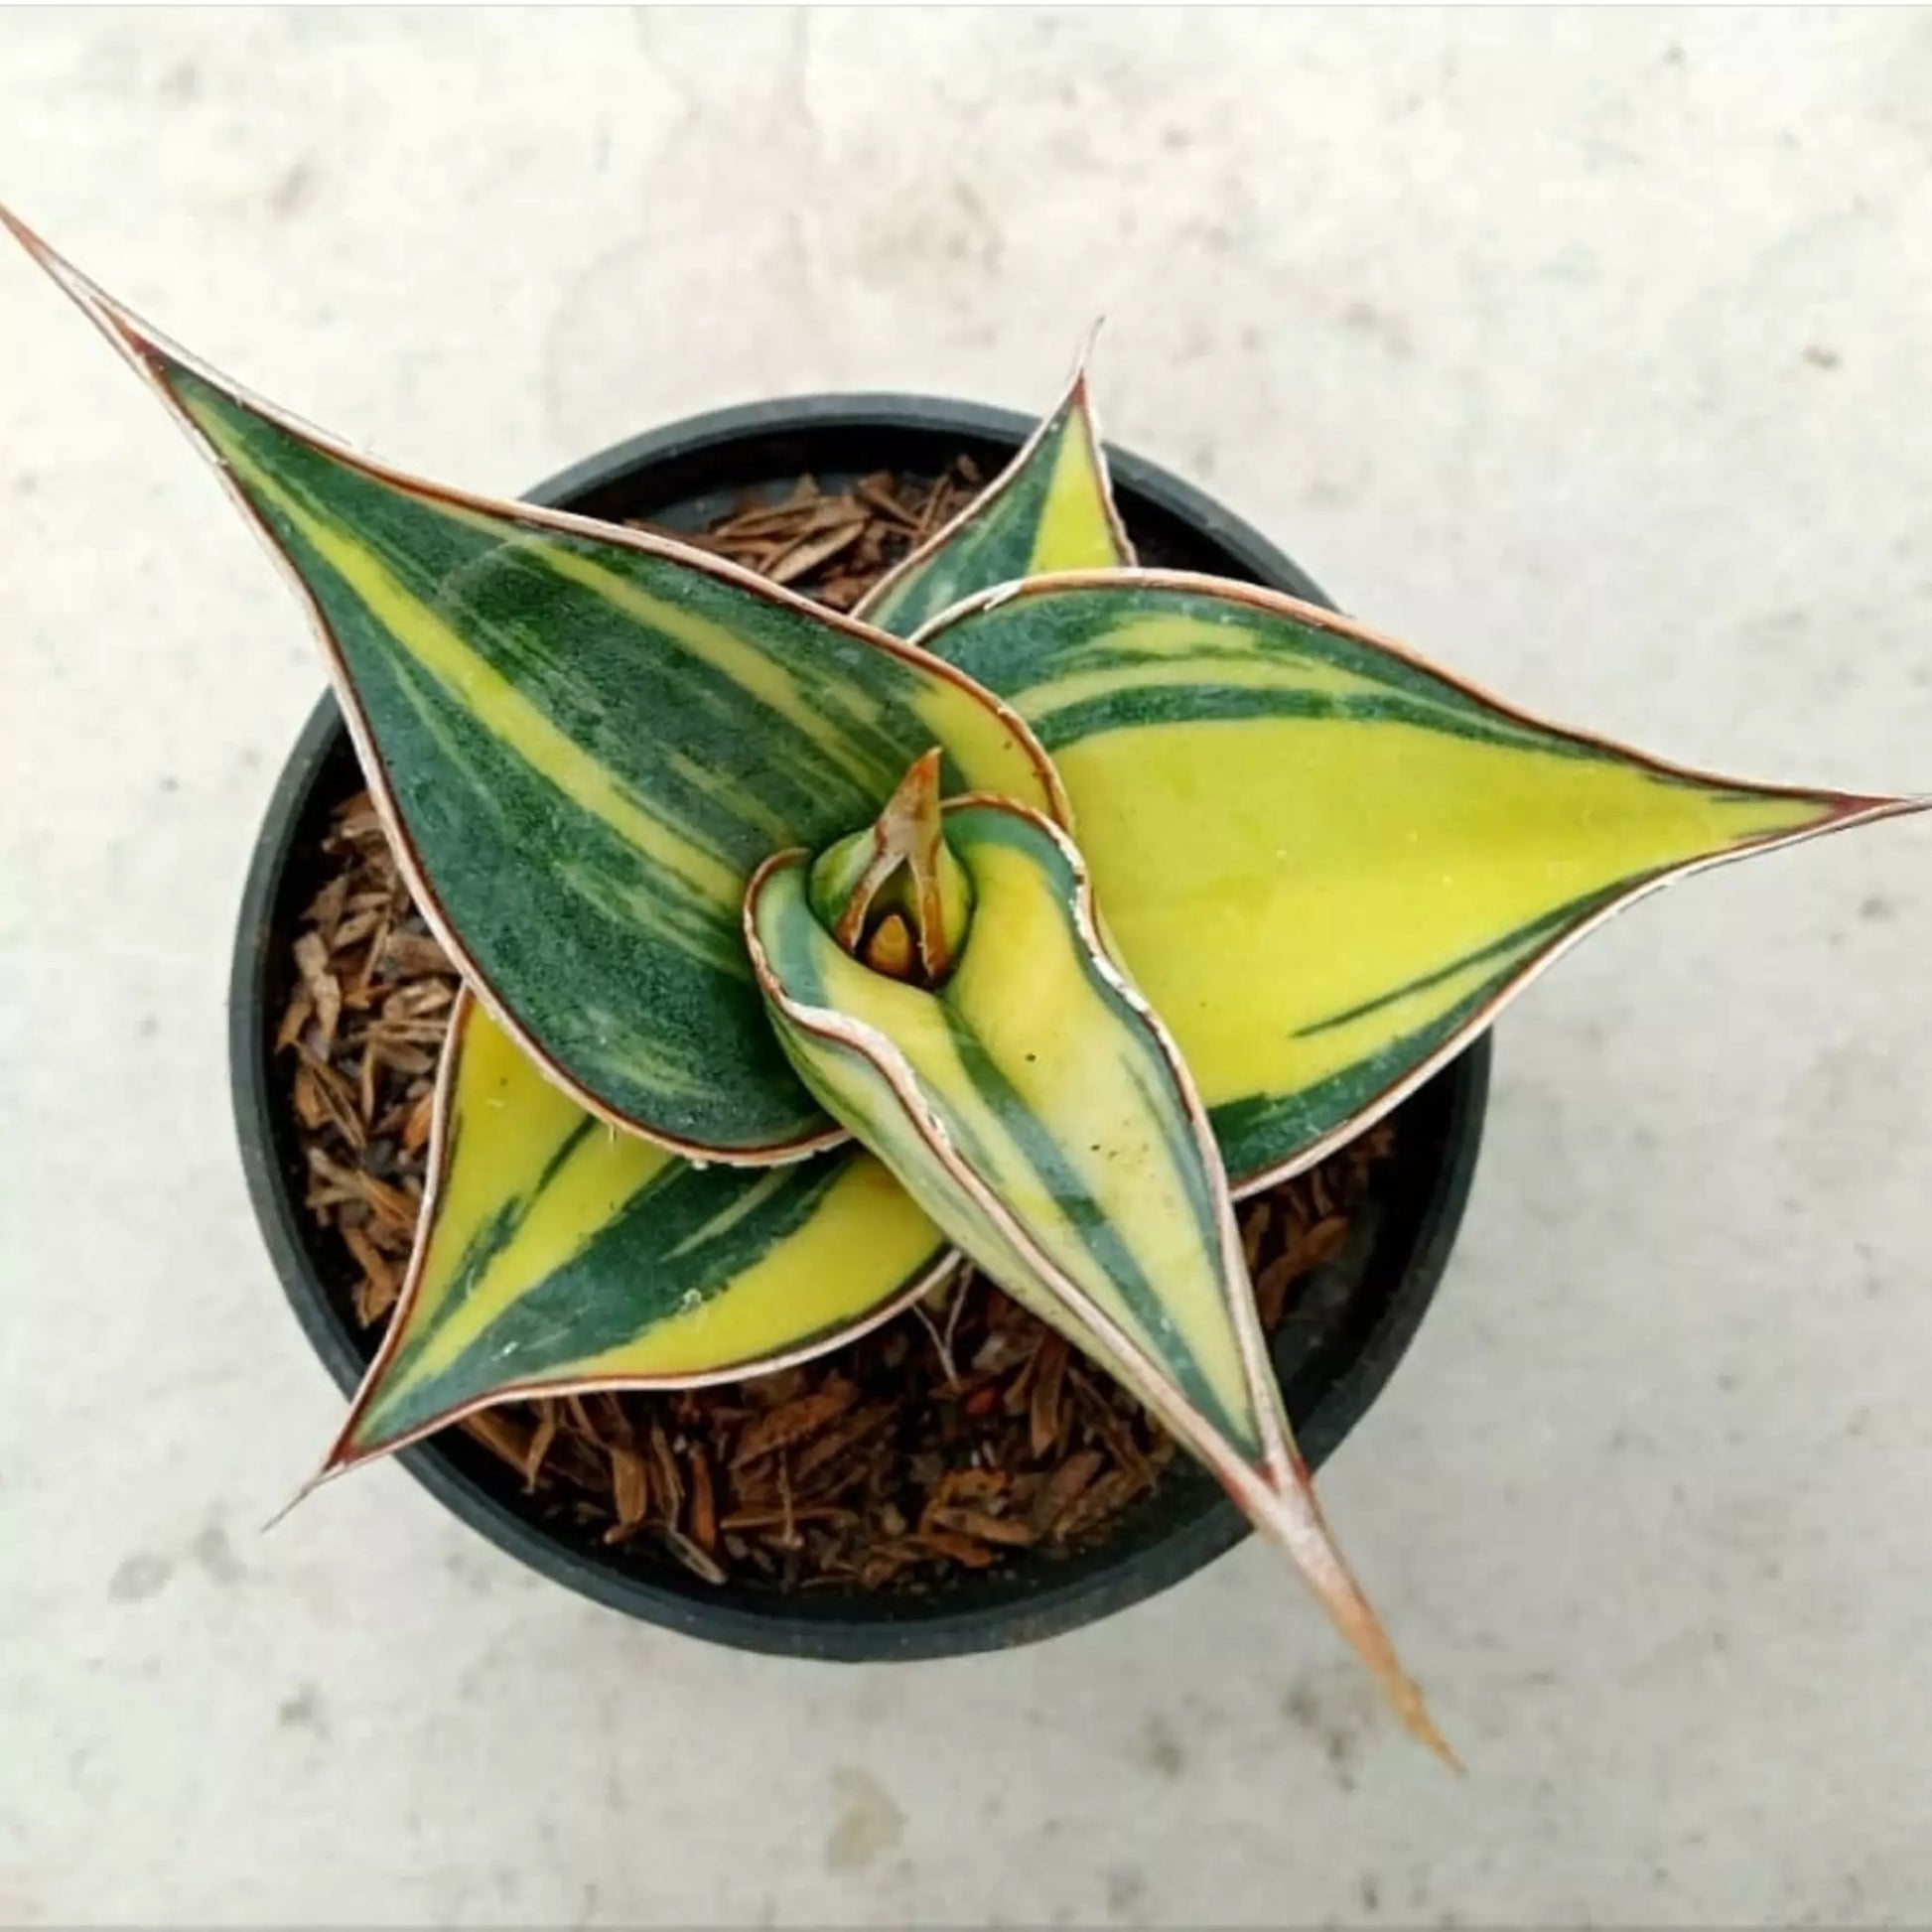 Sansevieria Pinguicula Variegated For Sale